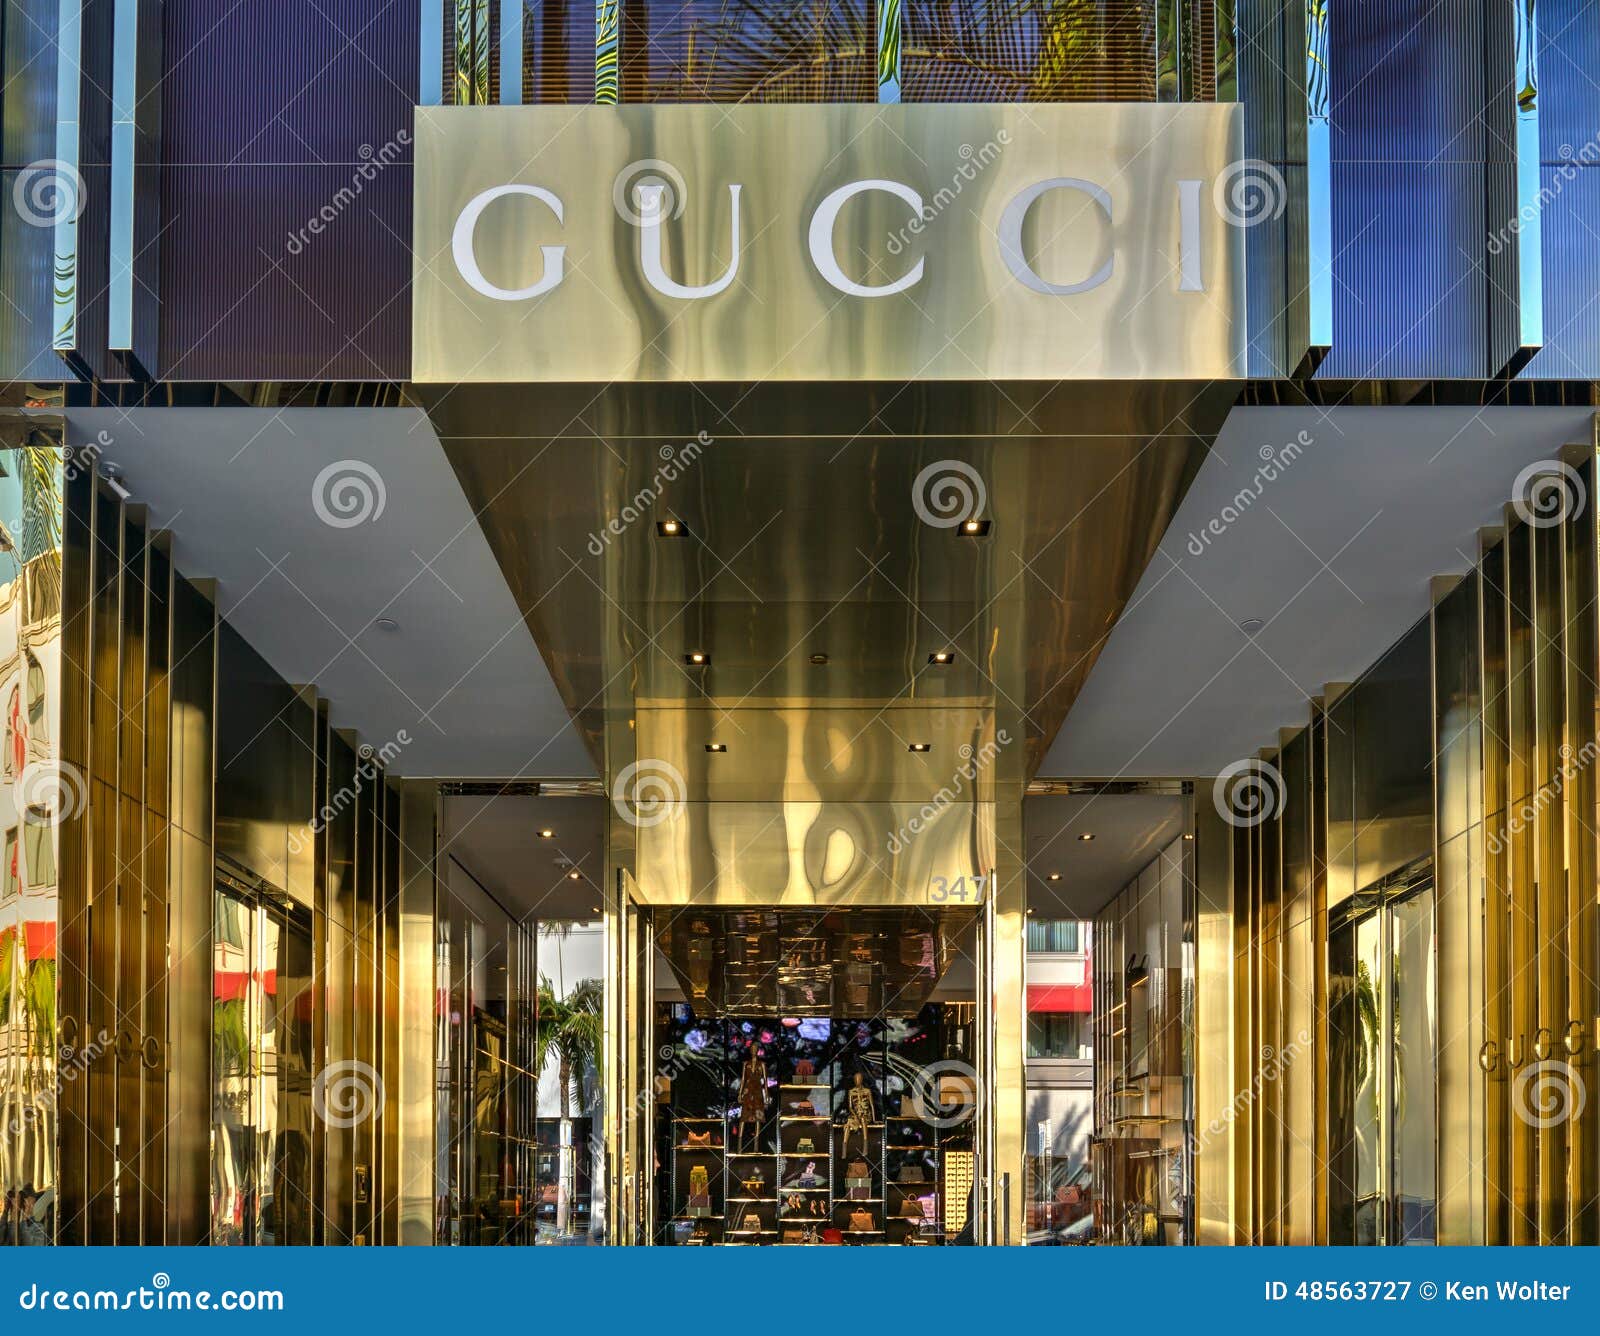 Gucci Retail Store Exterior Editorial Photography - Image: 48563727